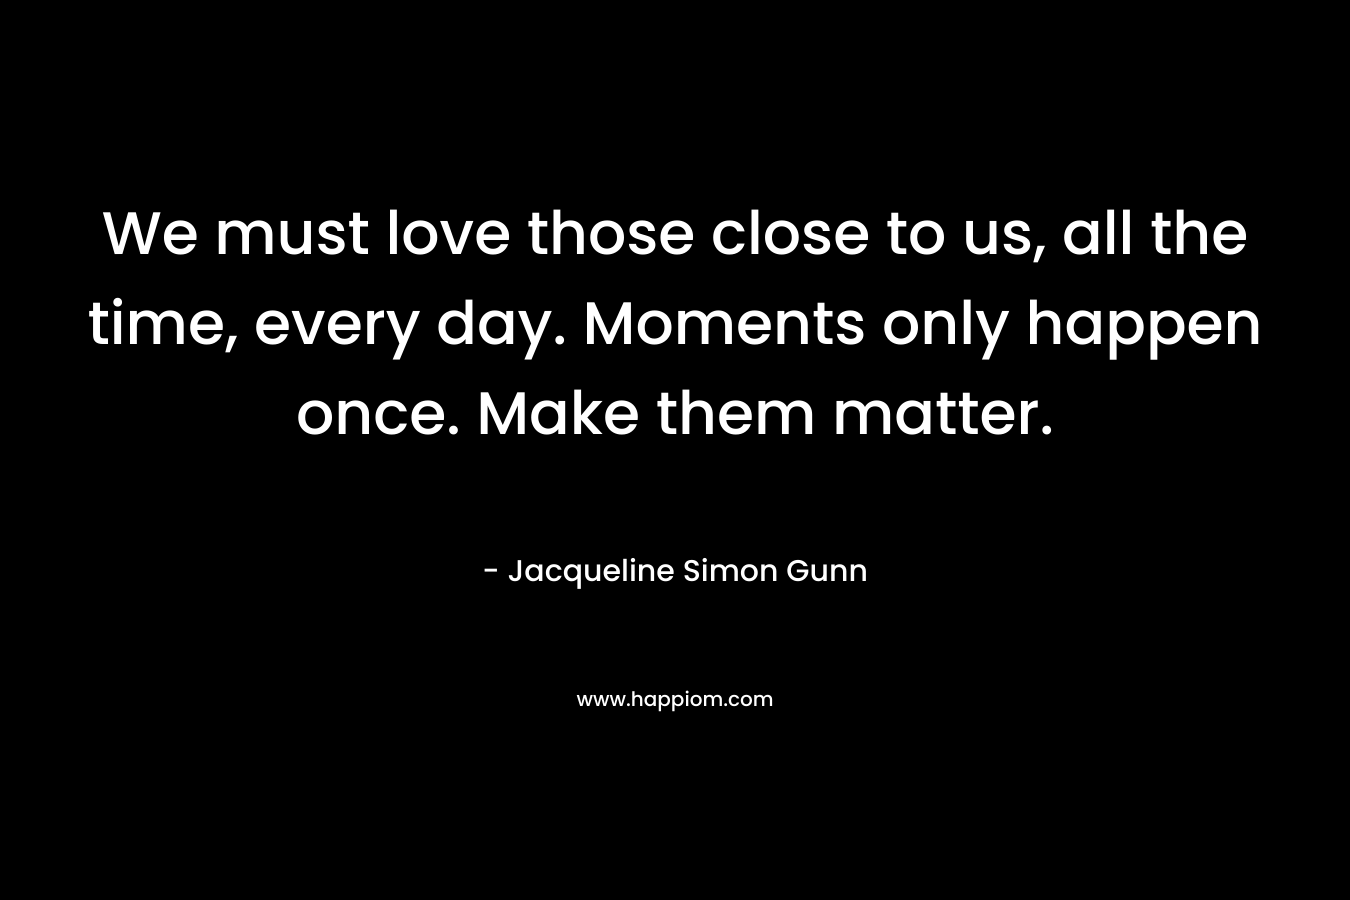 We must love those close to us, all the time, every day. Moments only happen once. Make them matter.